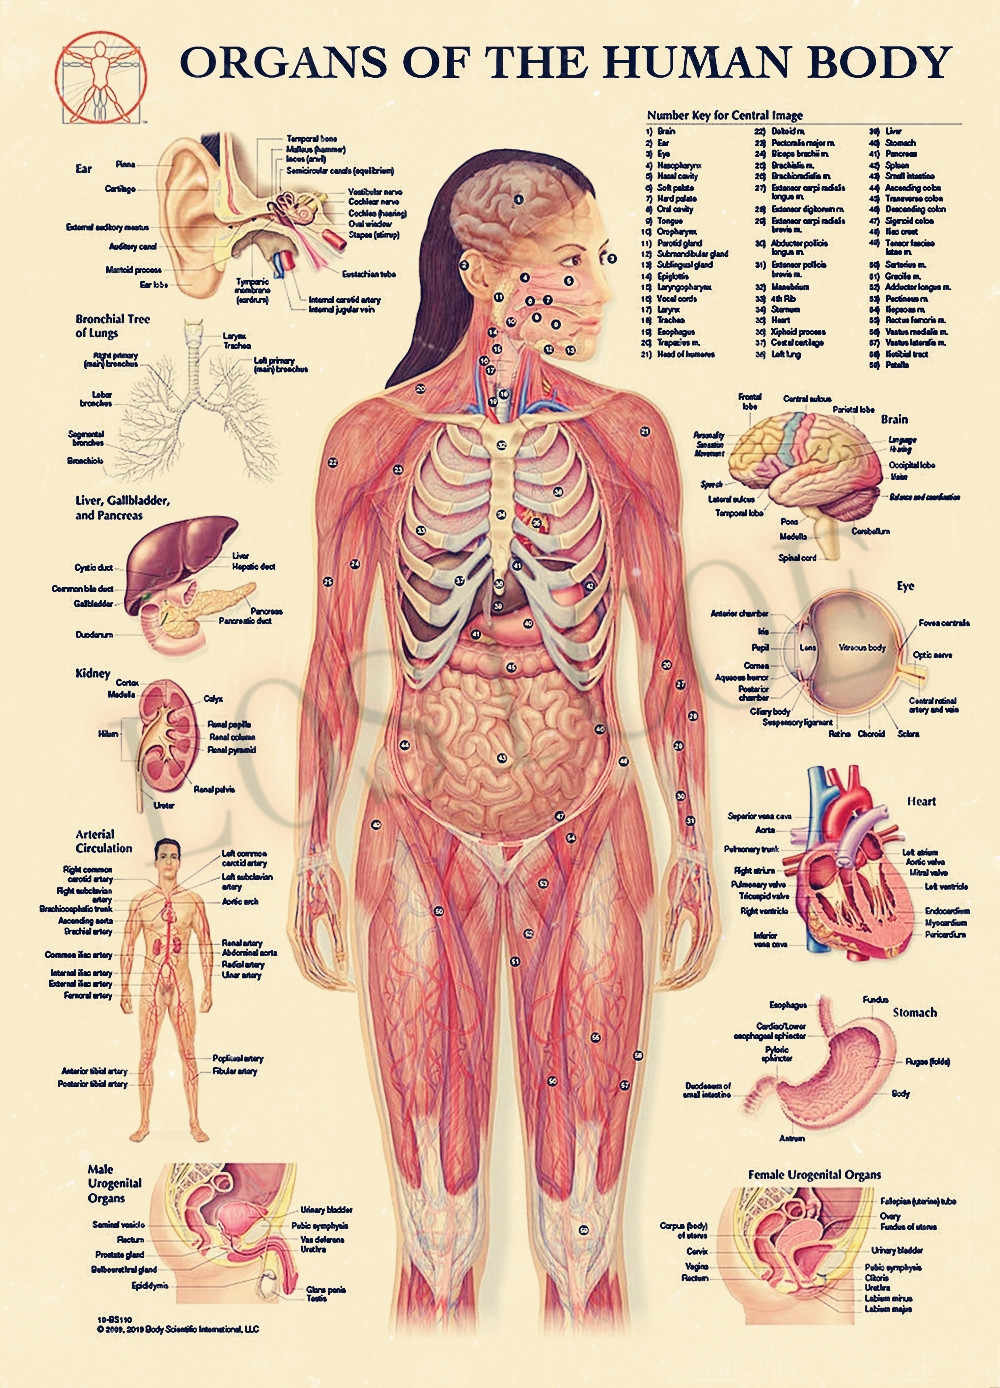 ORGANS OF THE HUMAN BODY SYSTEM Posters Wall Stickers Home Decor 